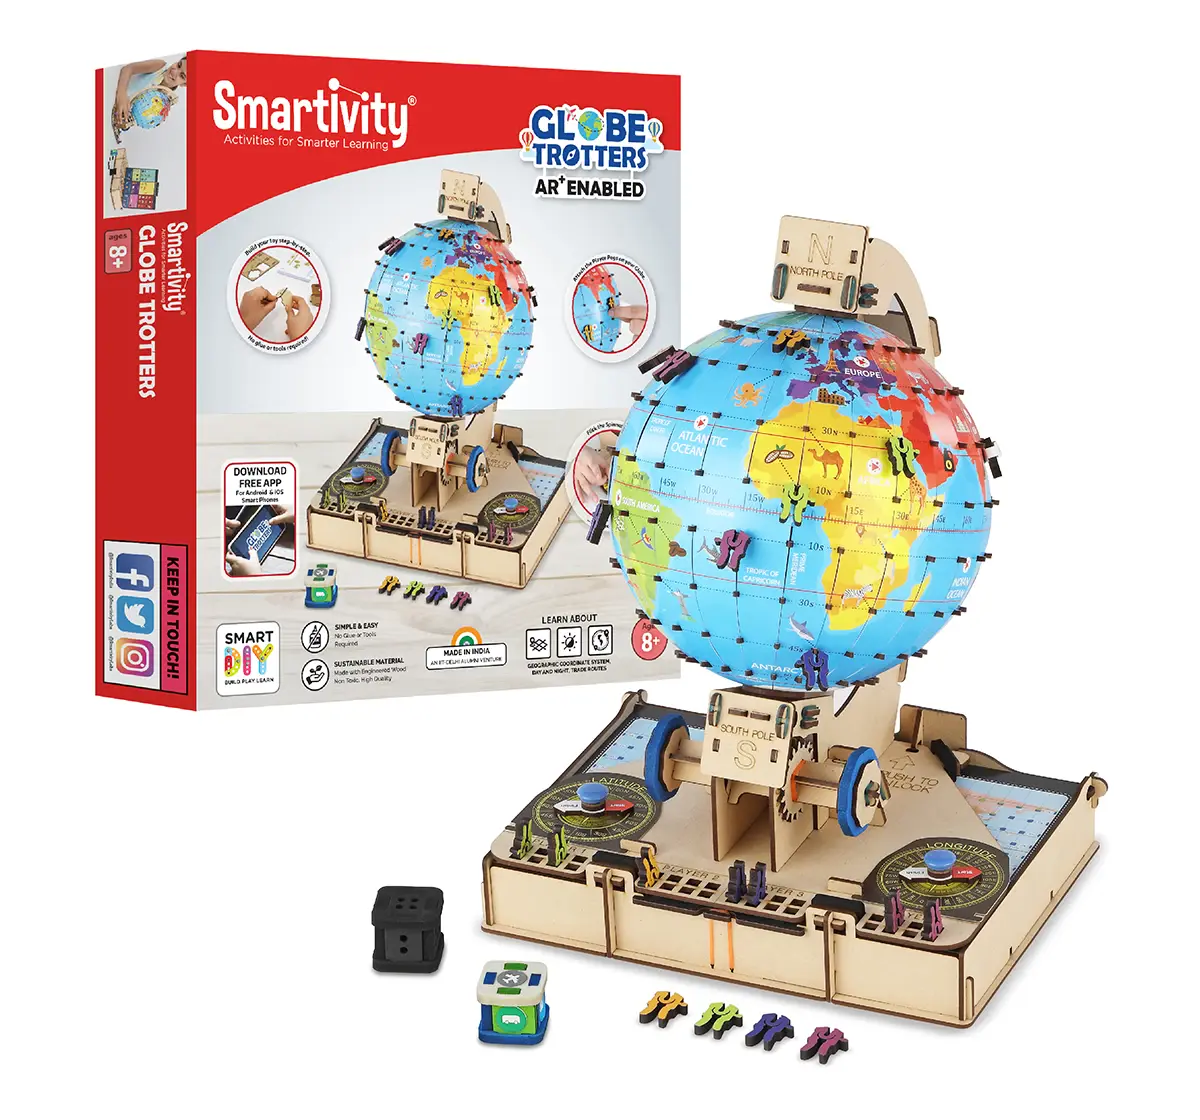 Smartivity Labs GLOBE Trotters Augmented Reality STEM Educational DIY Construction Toy Kit Easy Instructions Experiment Play Learn Science Free App for Kids age 7Y+